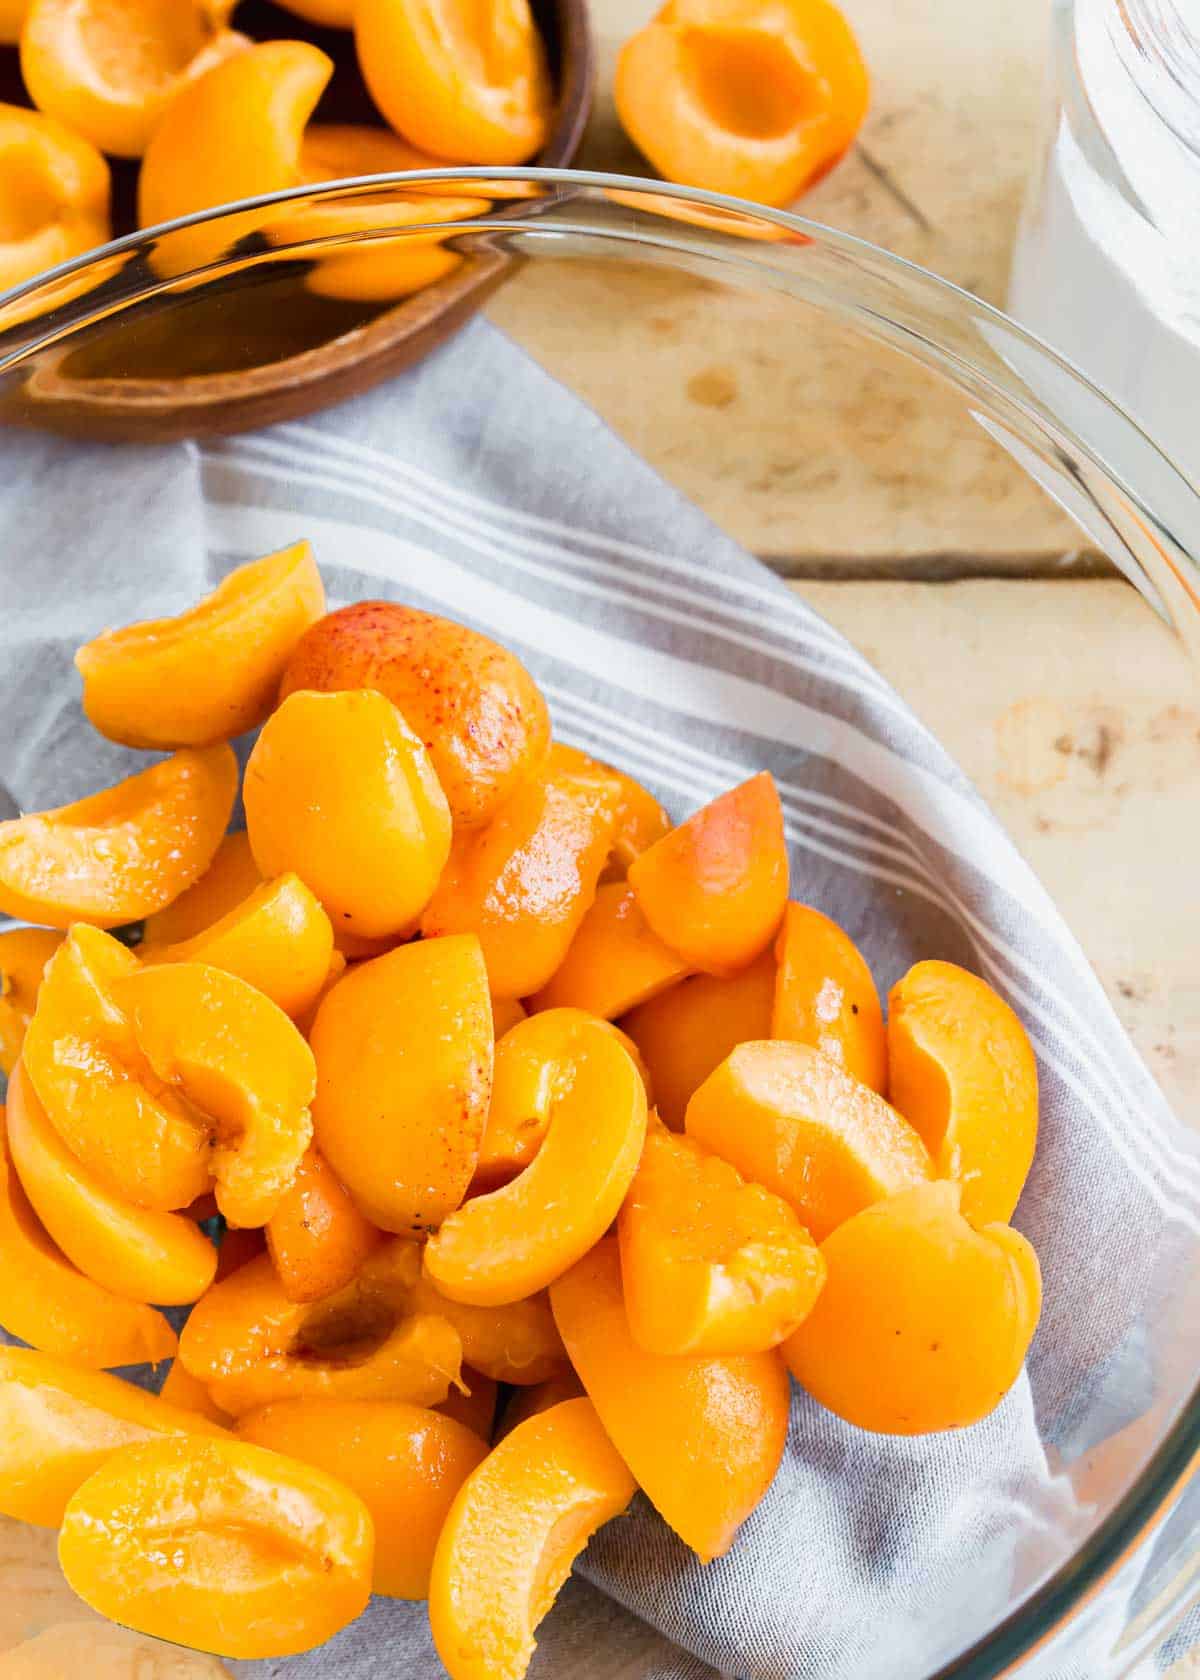 Apricot quarters in a glass bowl with a kitchen towel underneath.